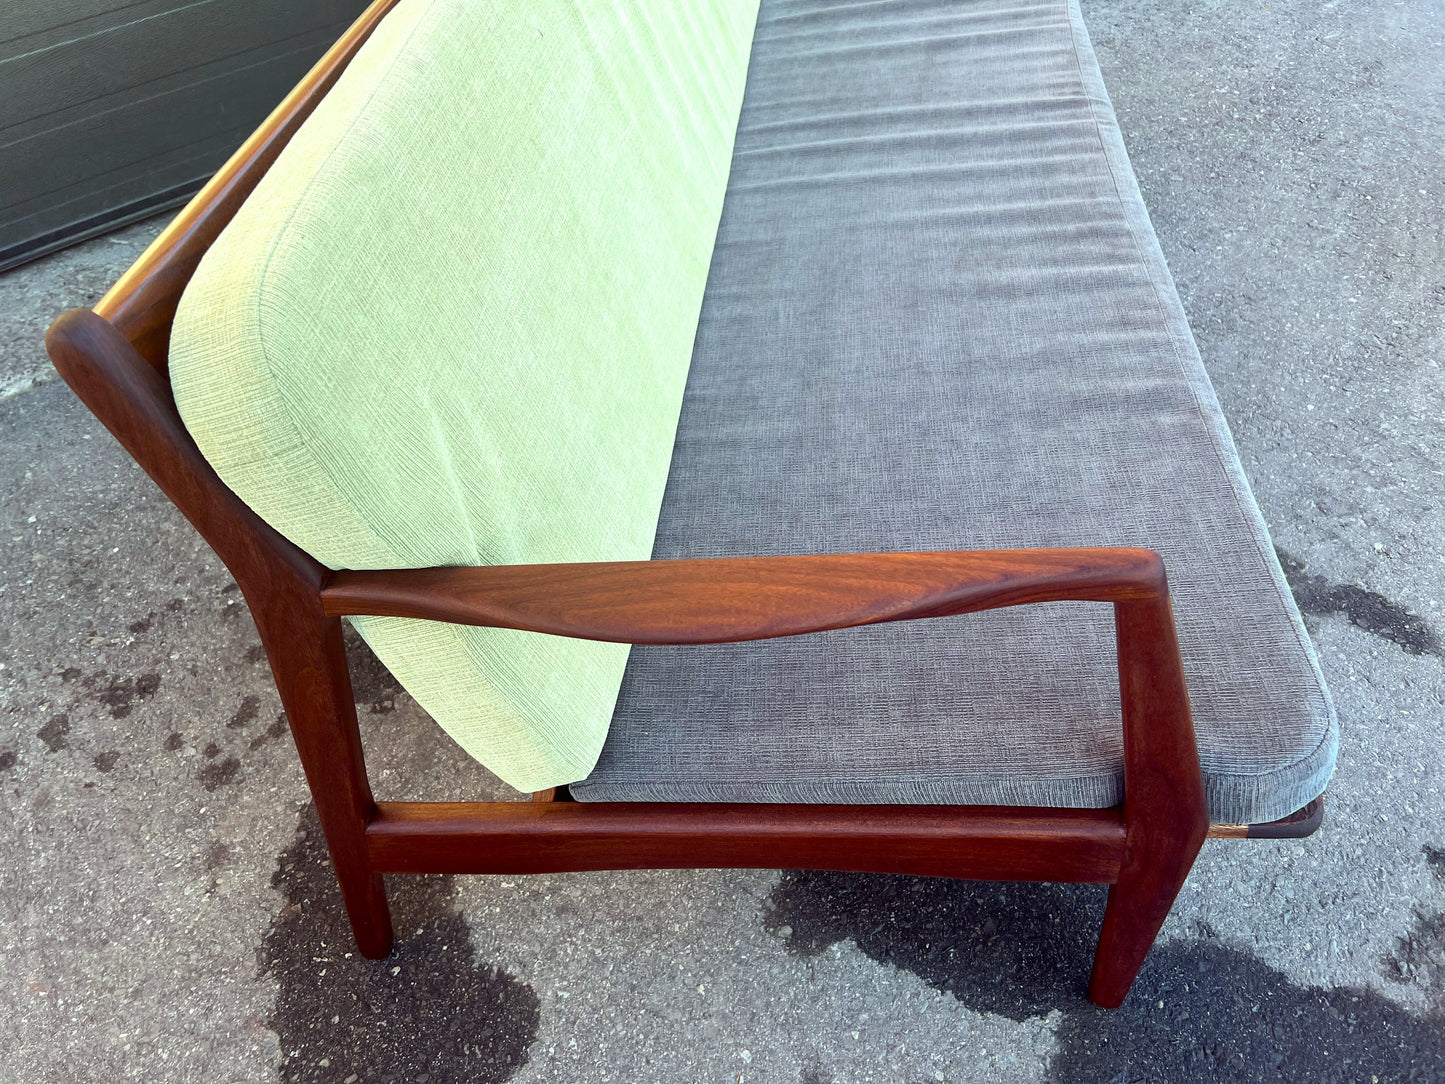 REFINISHED Mid Century Modern Teak 3-Seater Sofa by R. Huber will get NEW CUSHIONS